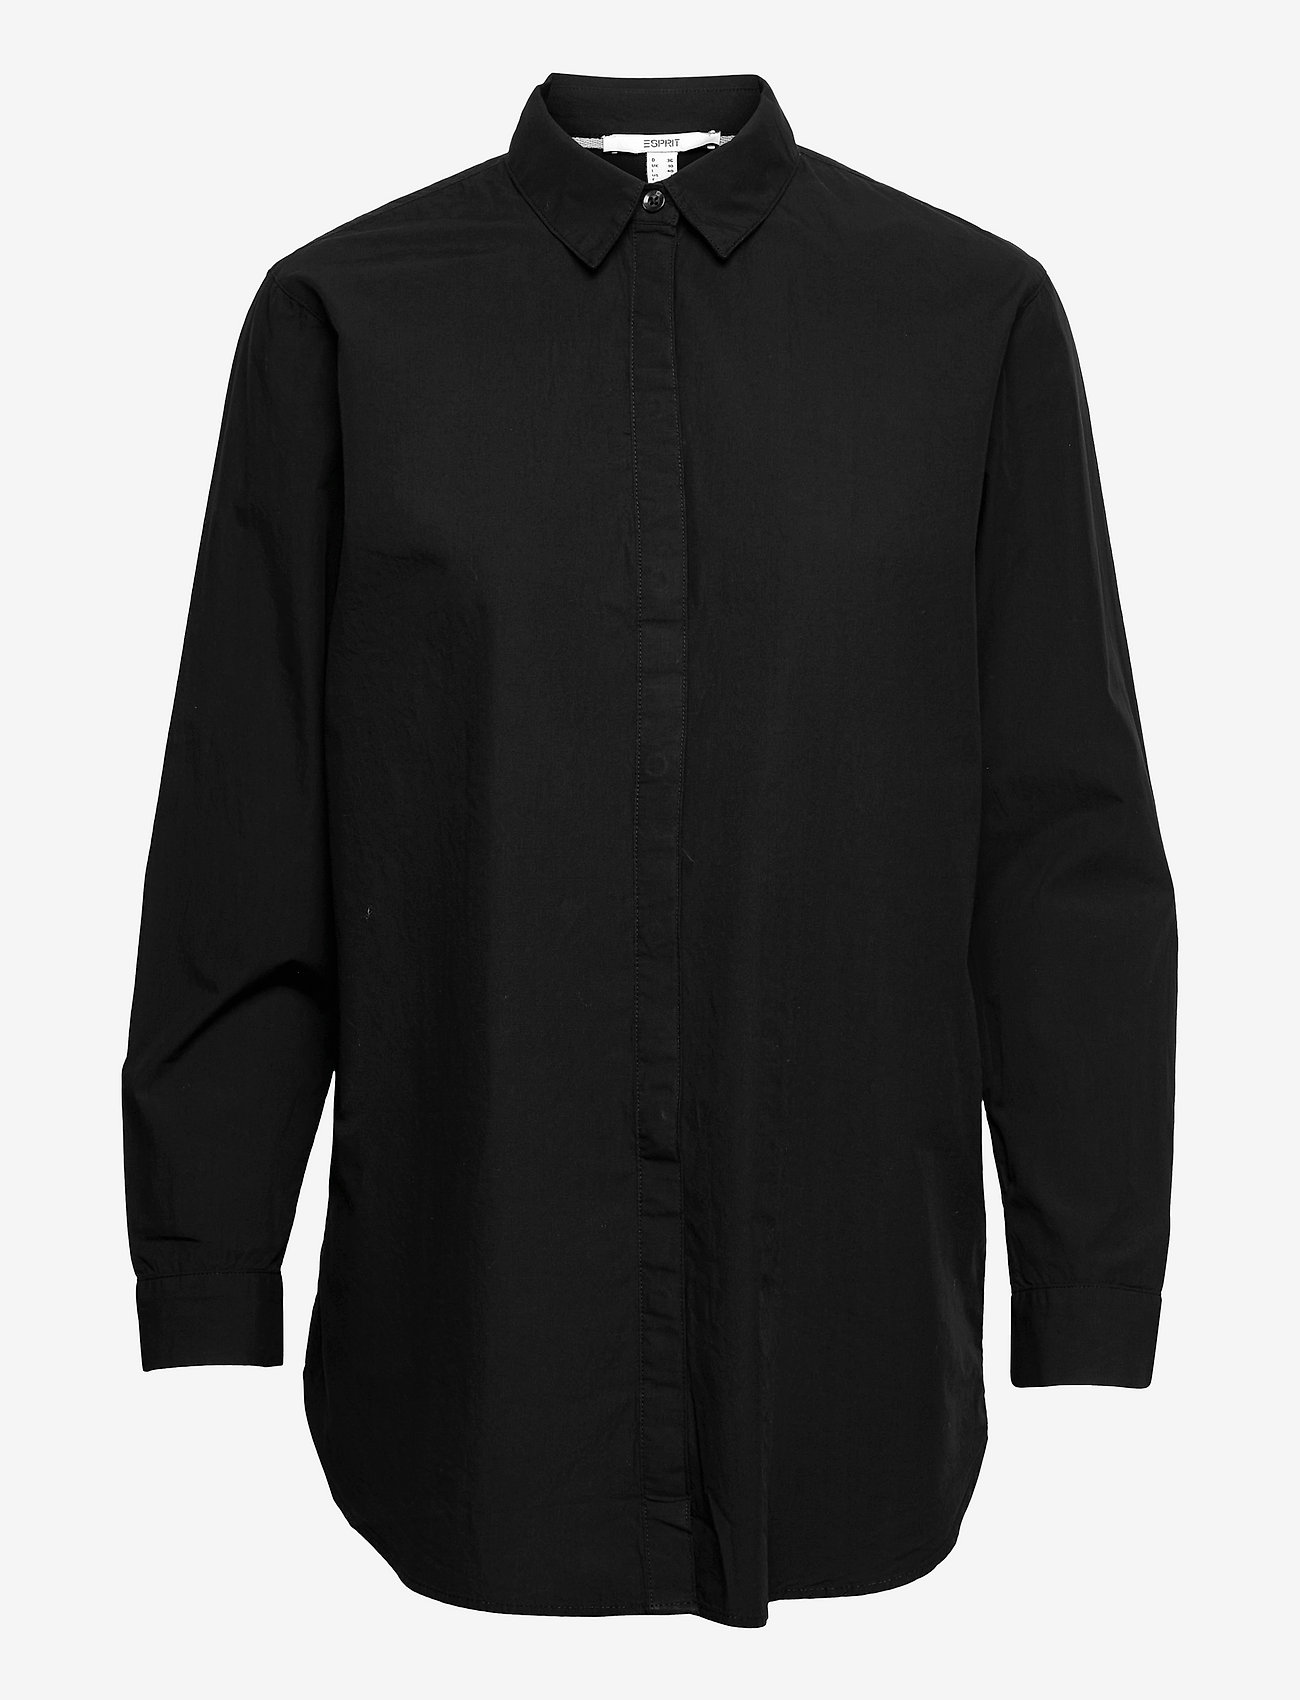 Esprit Casual - Long blouse made of 100% organic cotton - long-sleeved shirts - black - 0